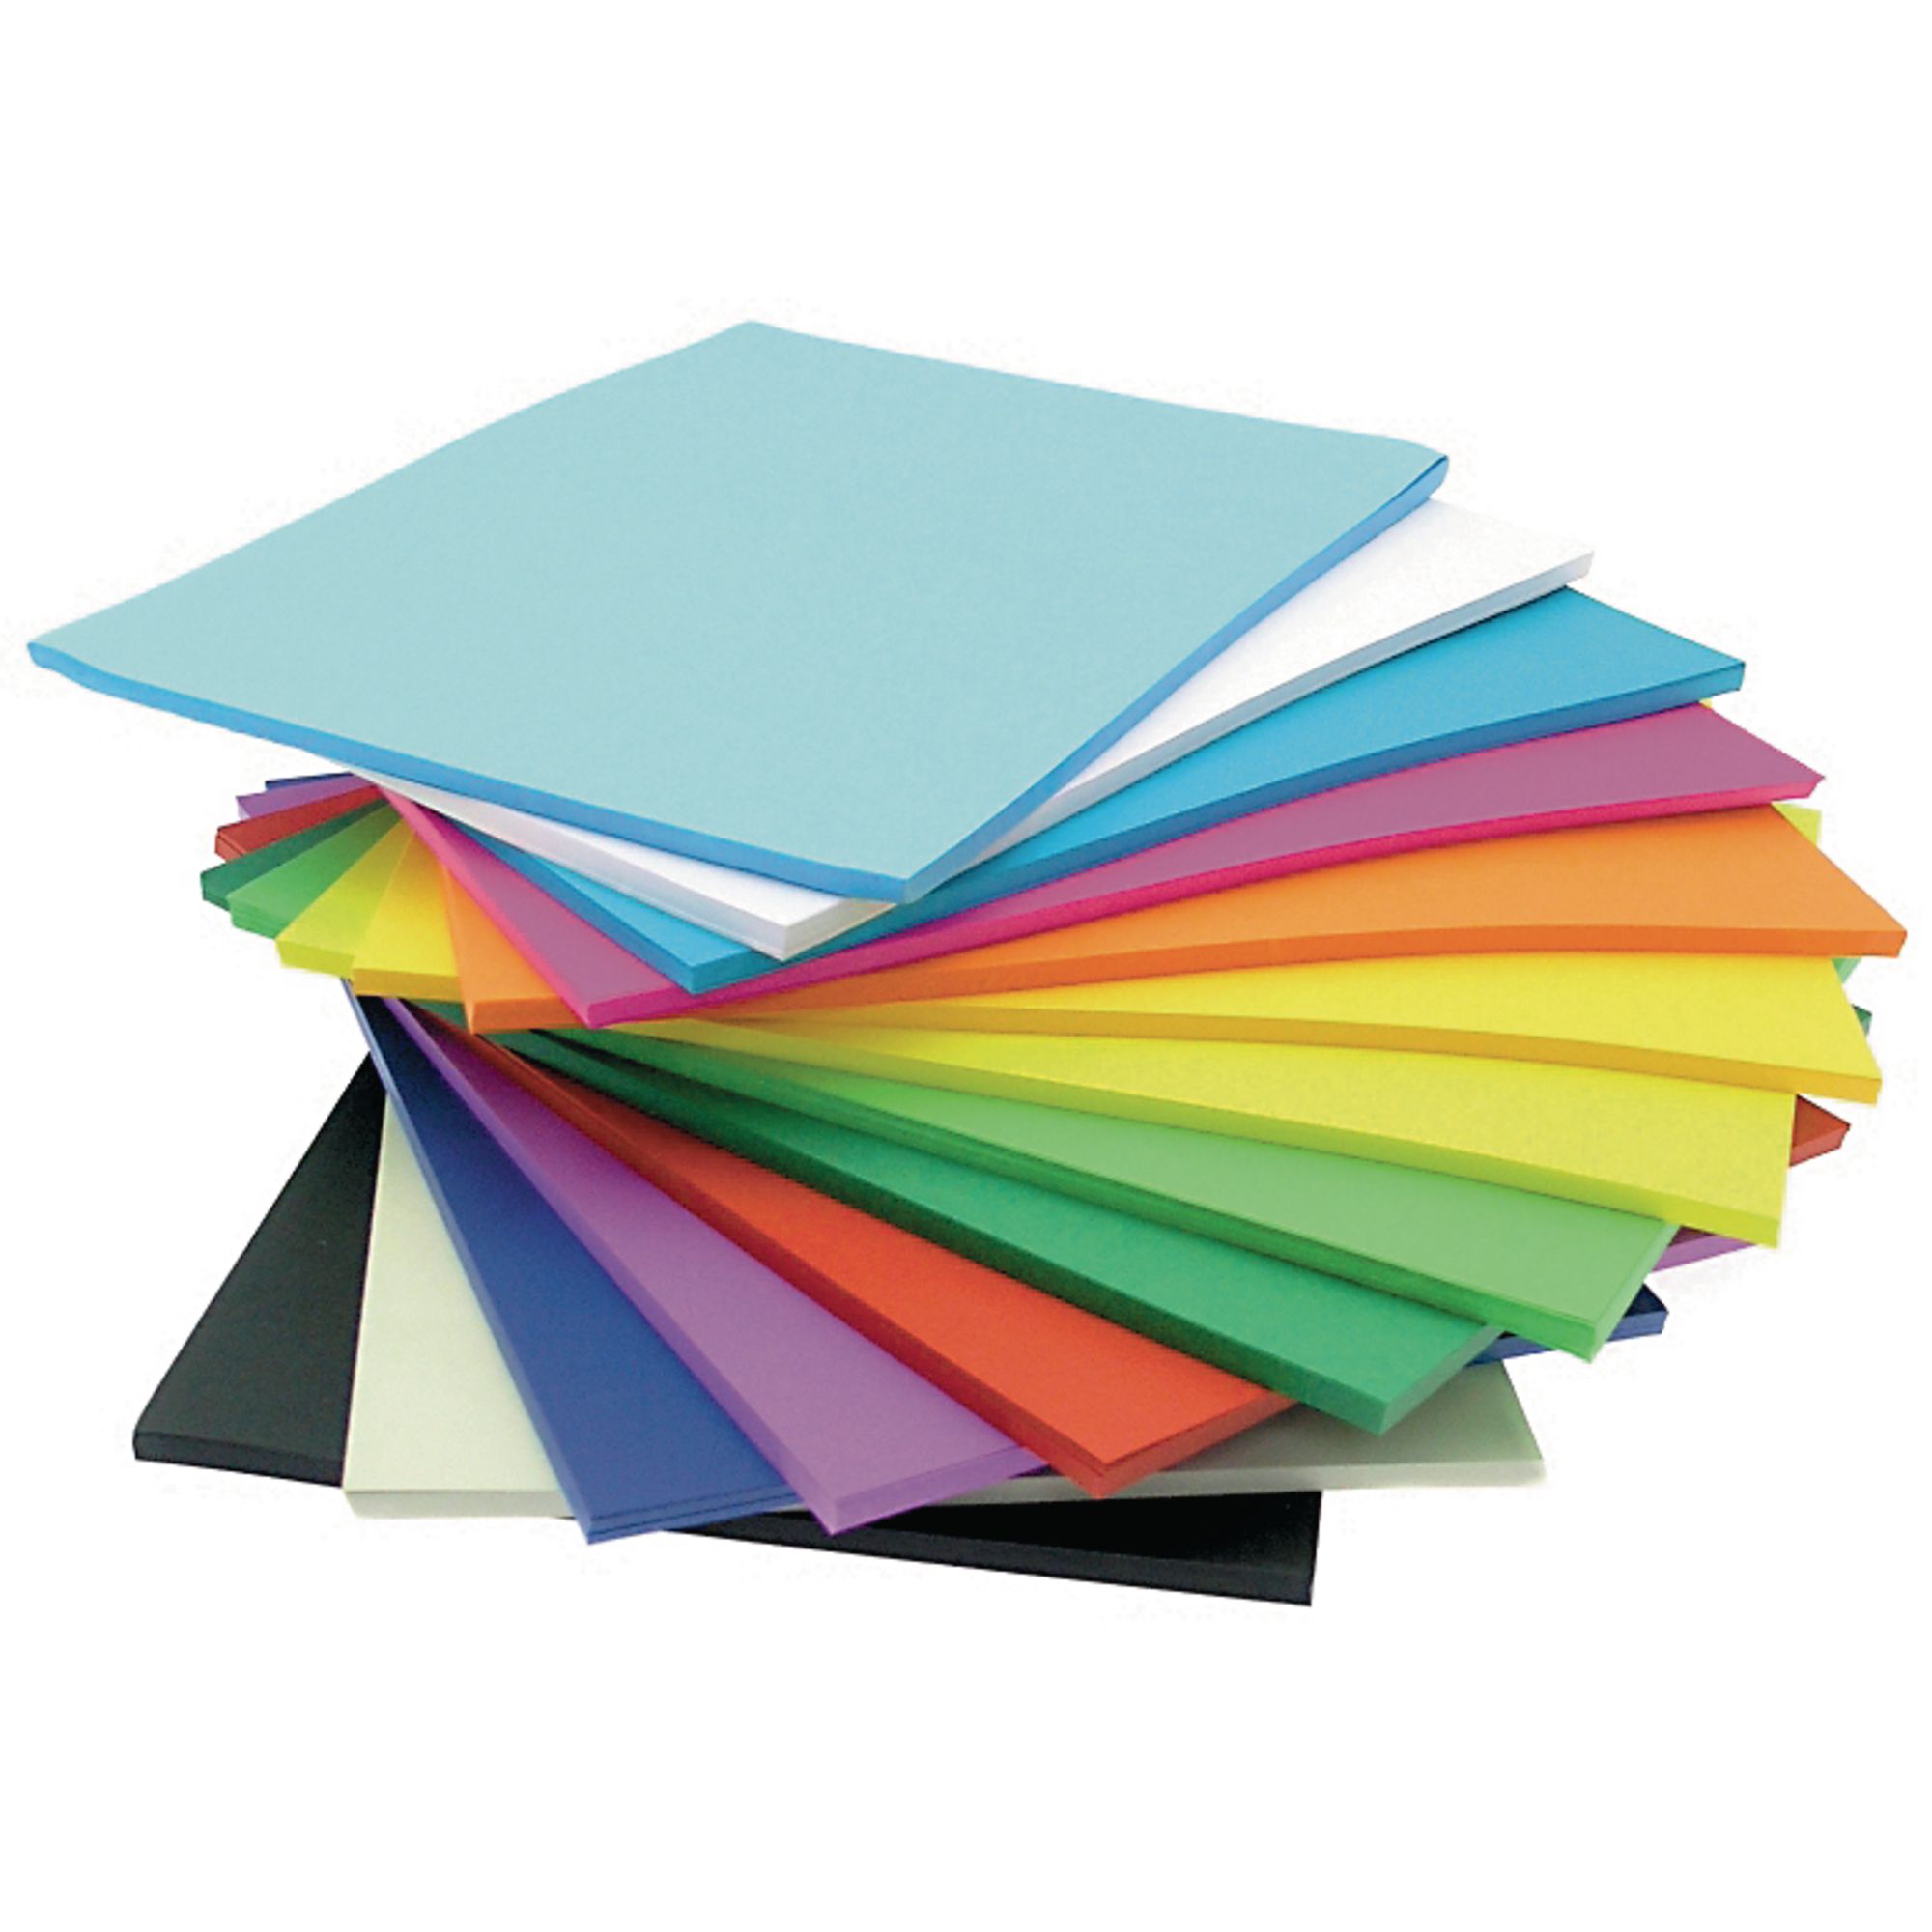 Cutting Paper 100 Sheets 20 Colors Printing HUASUN Coloured Paper 70gsm Assorted Coloured Origami Paper A4 Copy Paper Decorative Paper Crafts Paper for DIY Crafts Decoration Sketch 